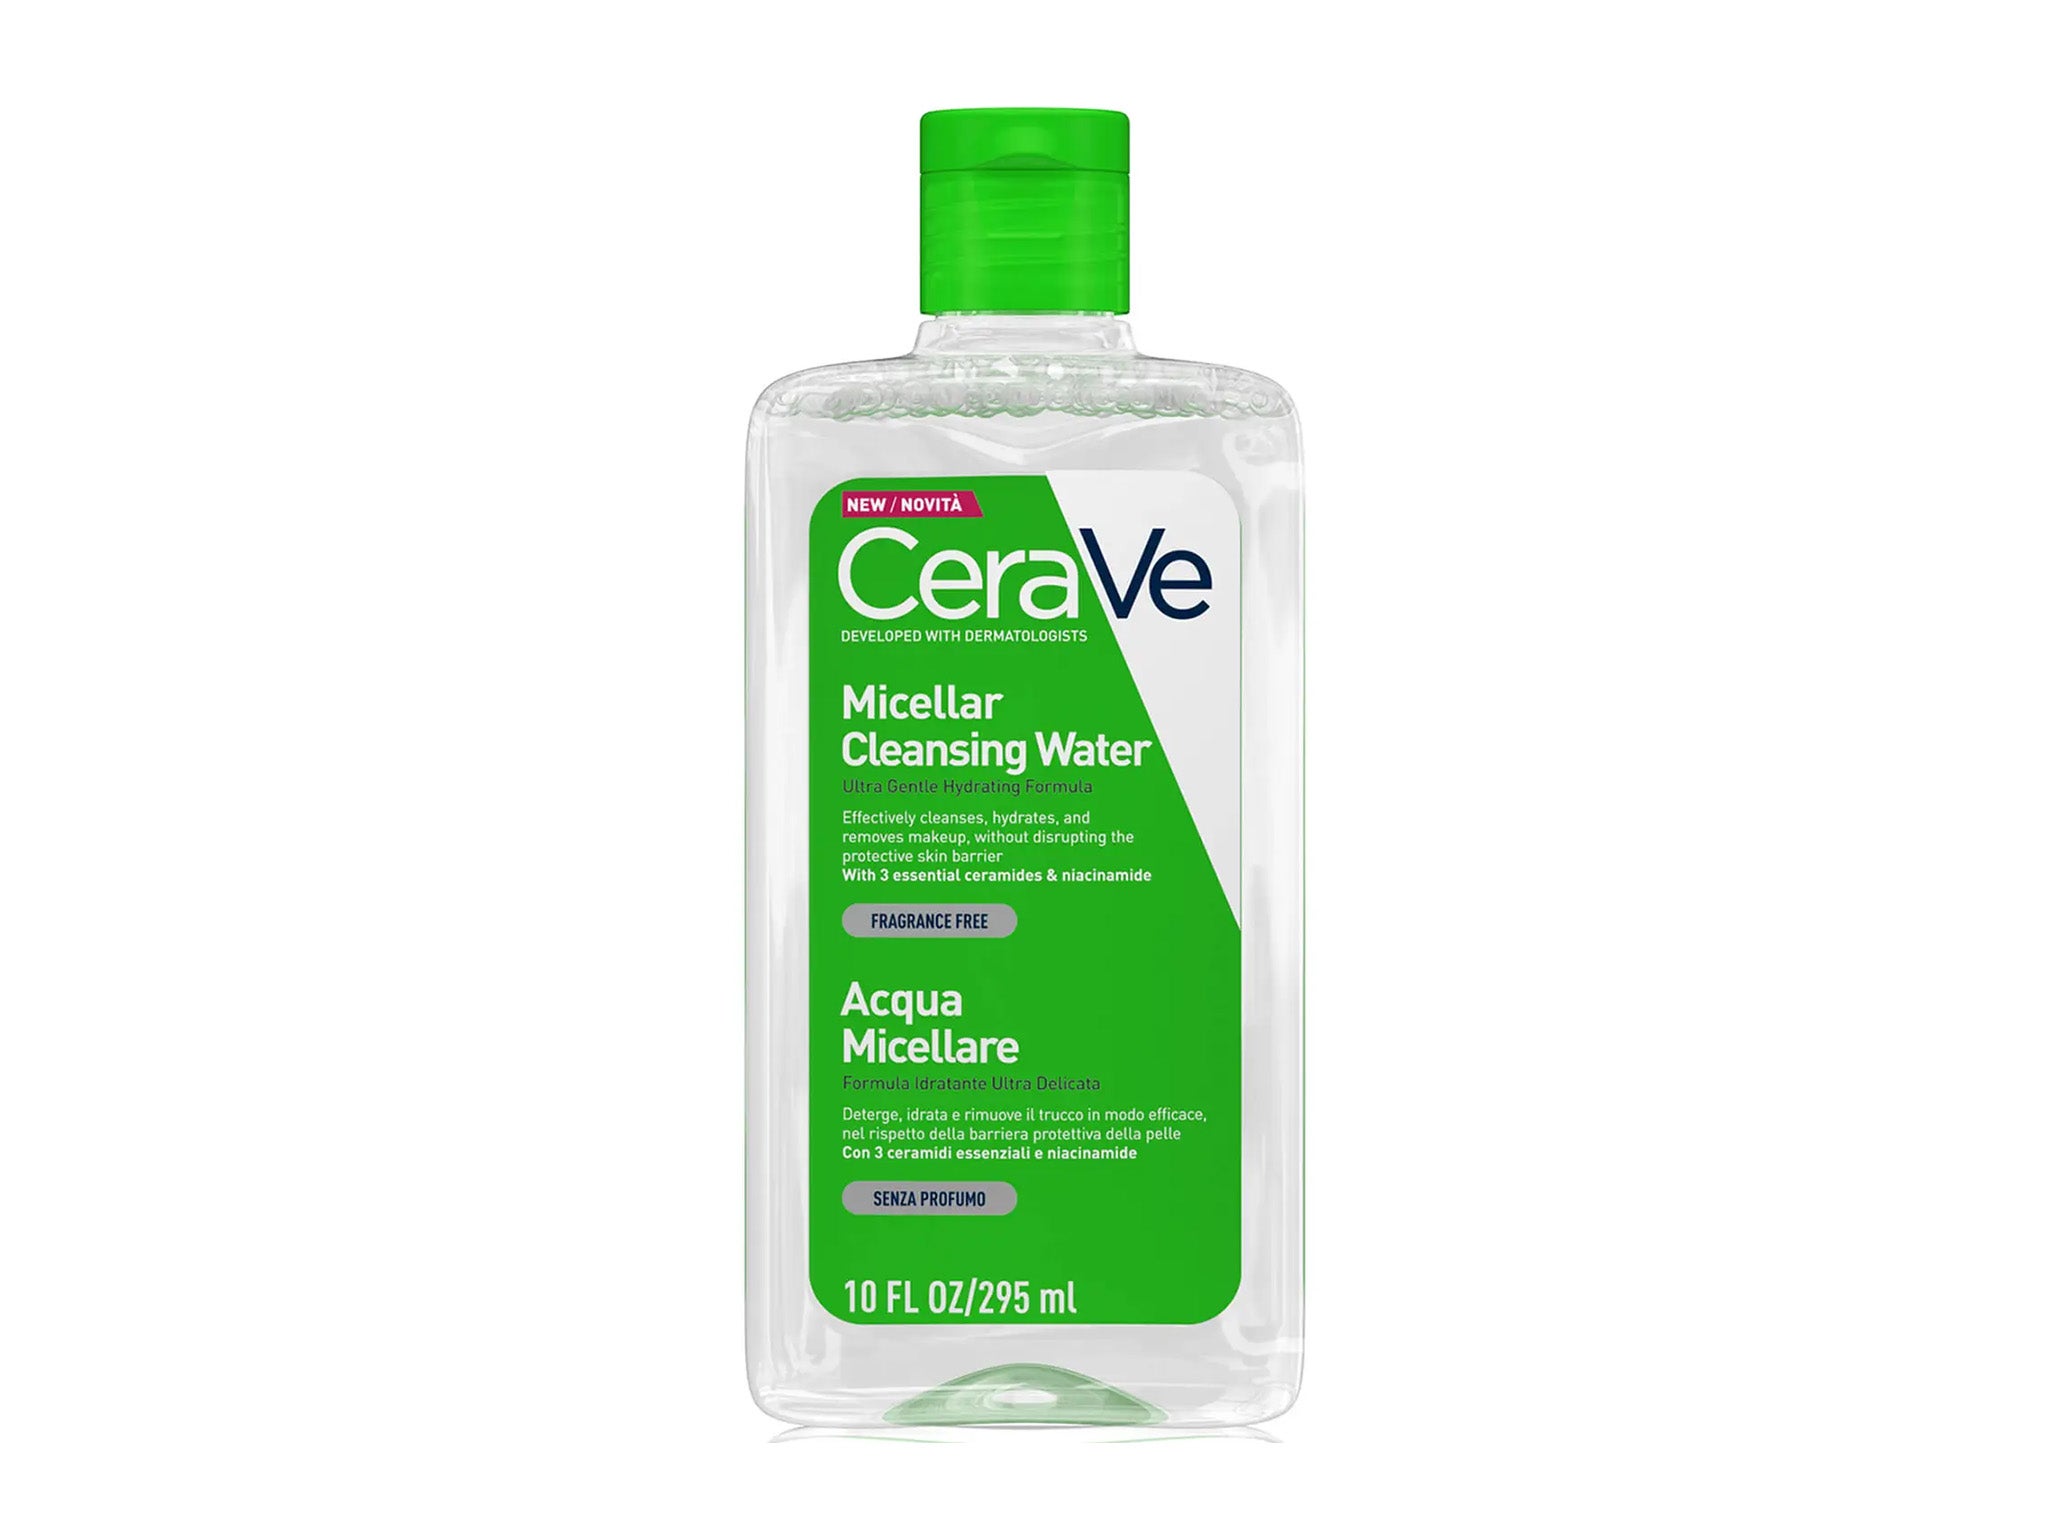 CeraVe micellar cleansing water